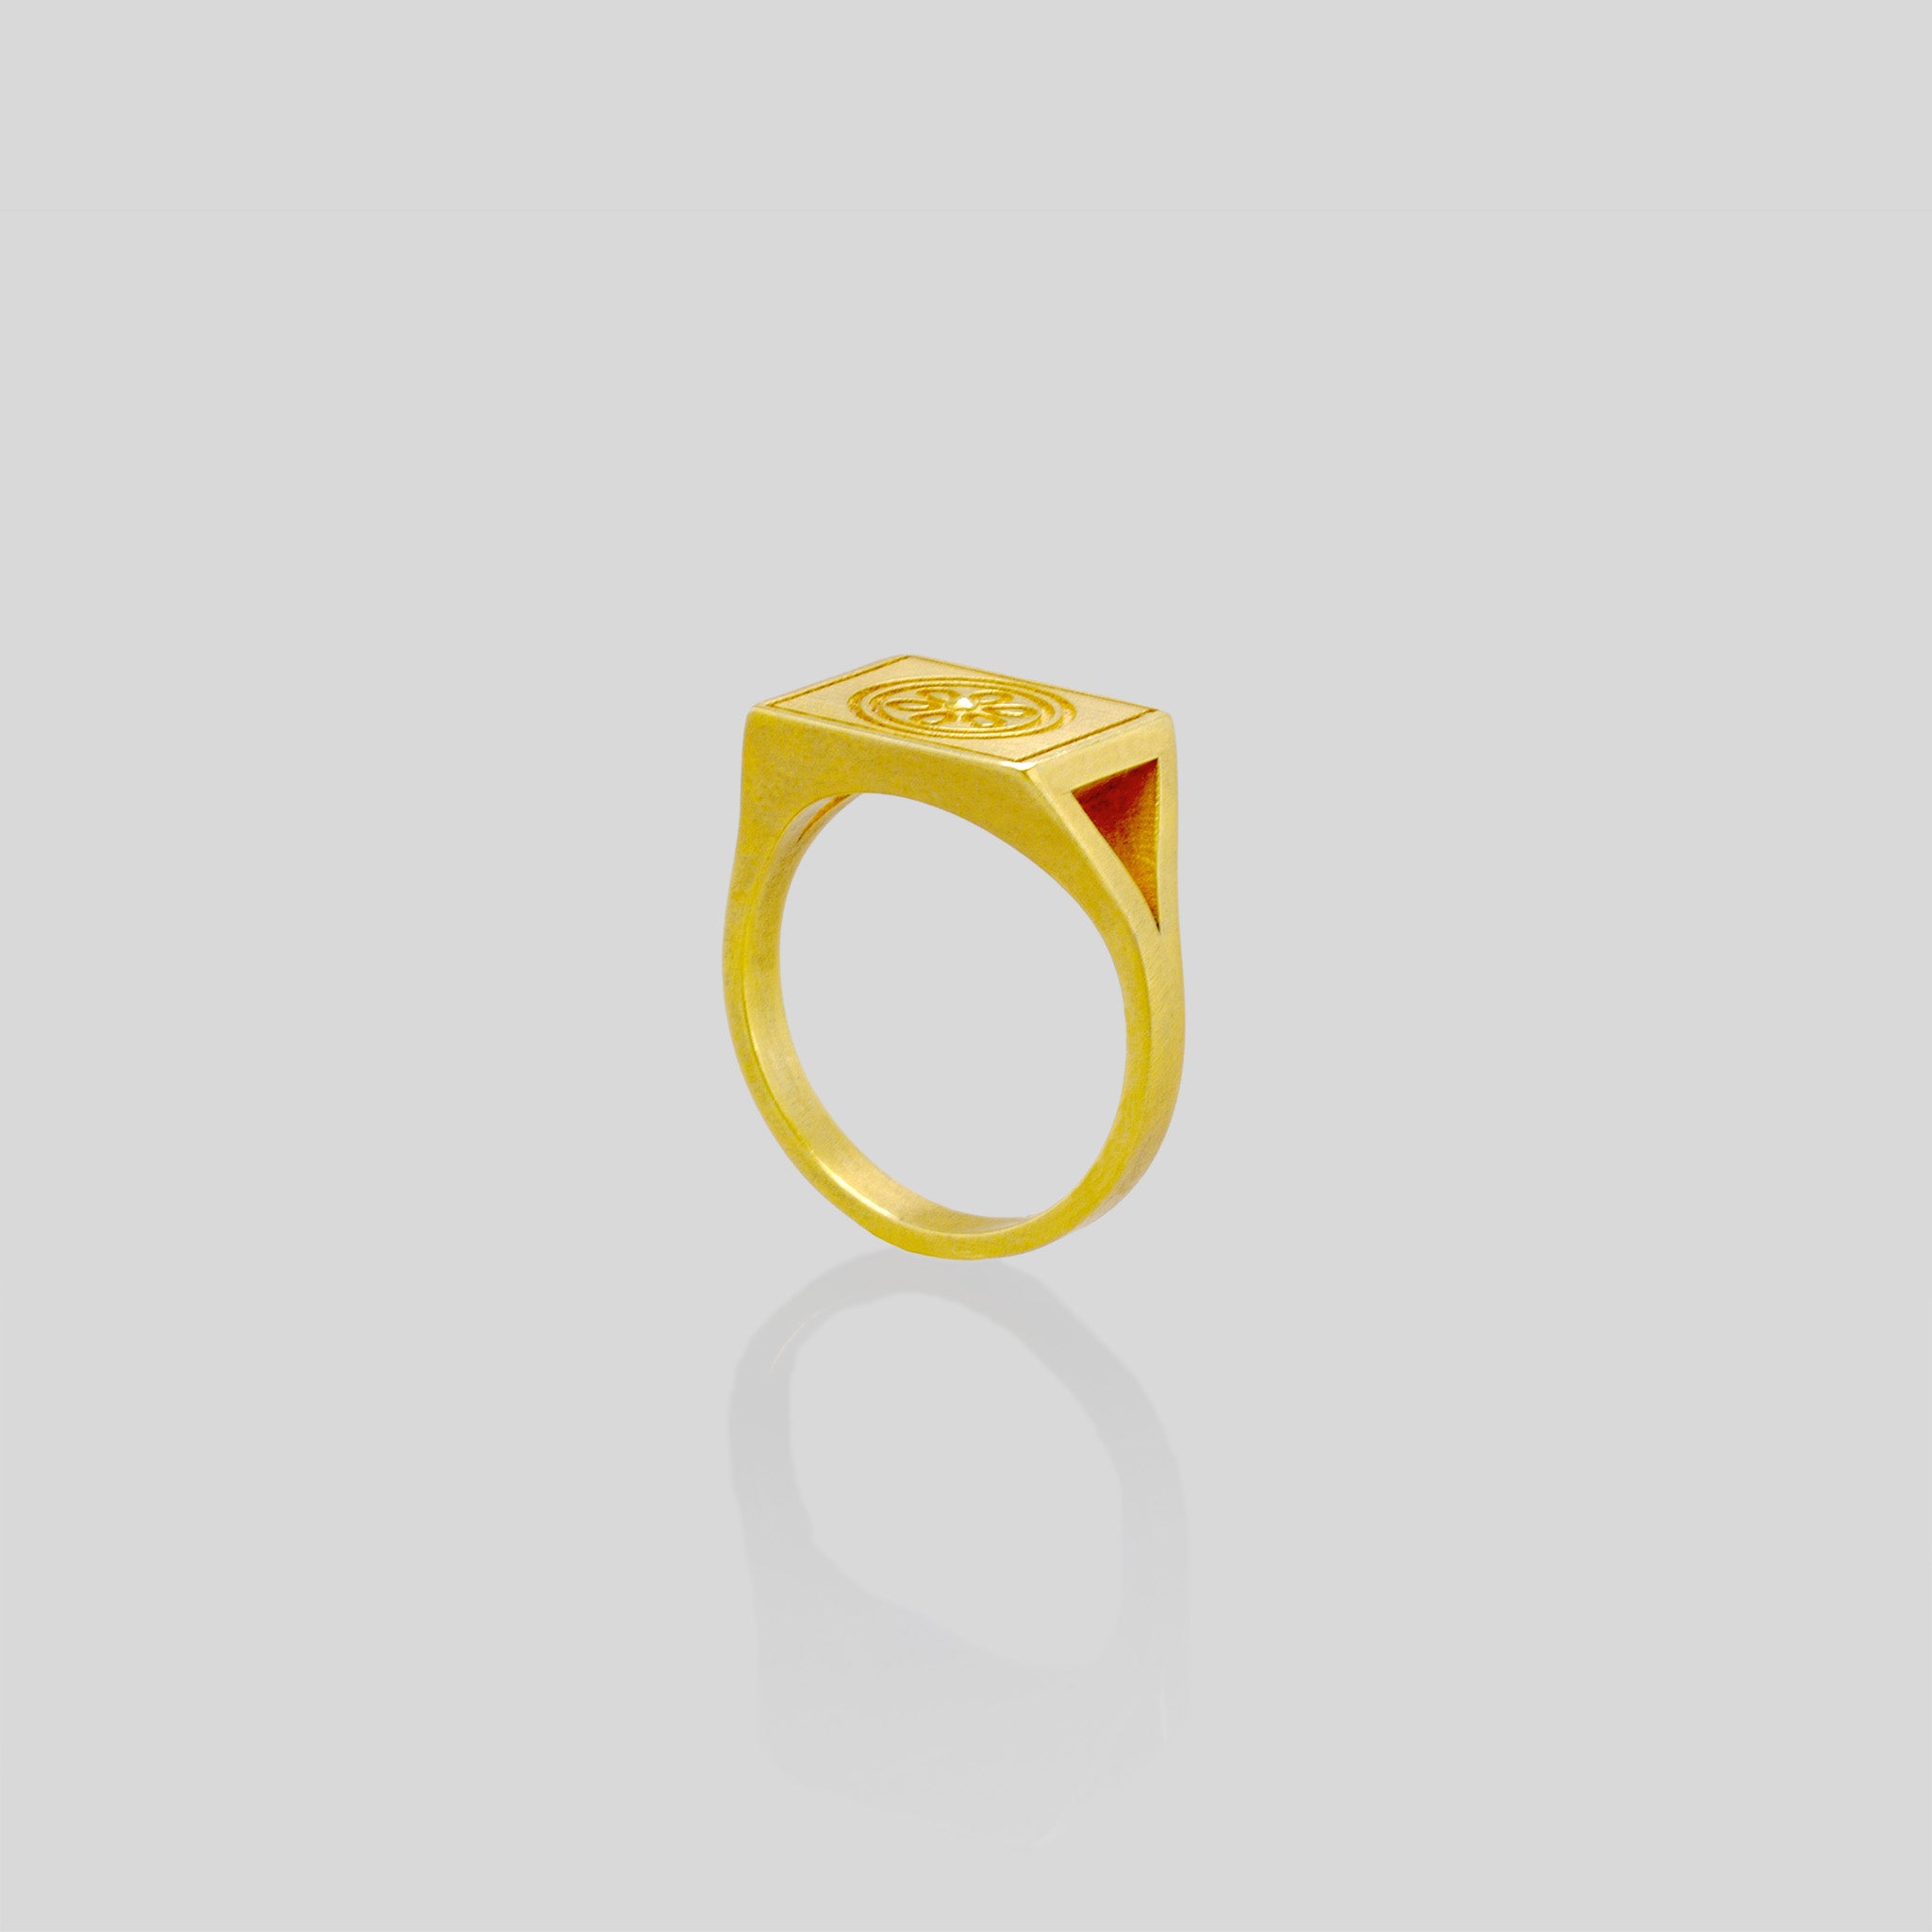 Elegant 18k gold signet ring with a square top featuring an embossed flower design, showcased against a reflective white background.